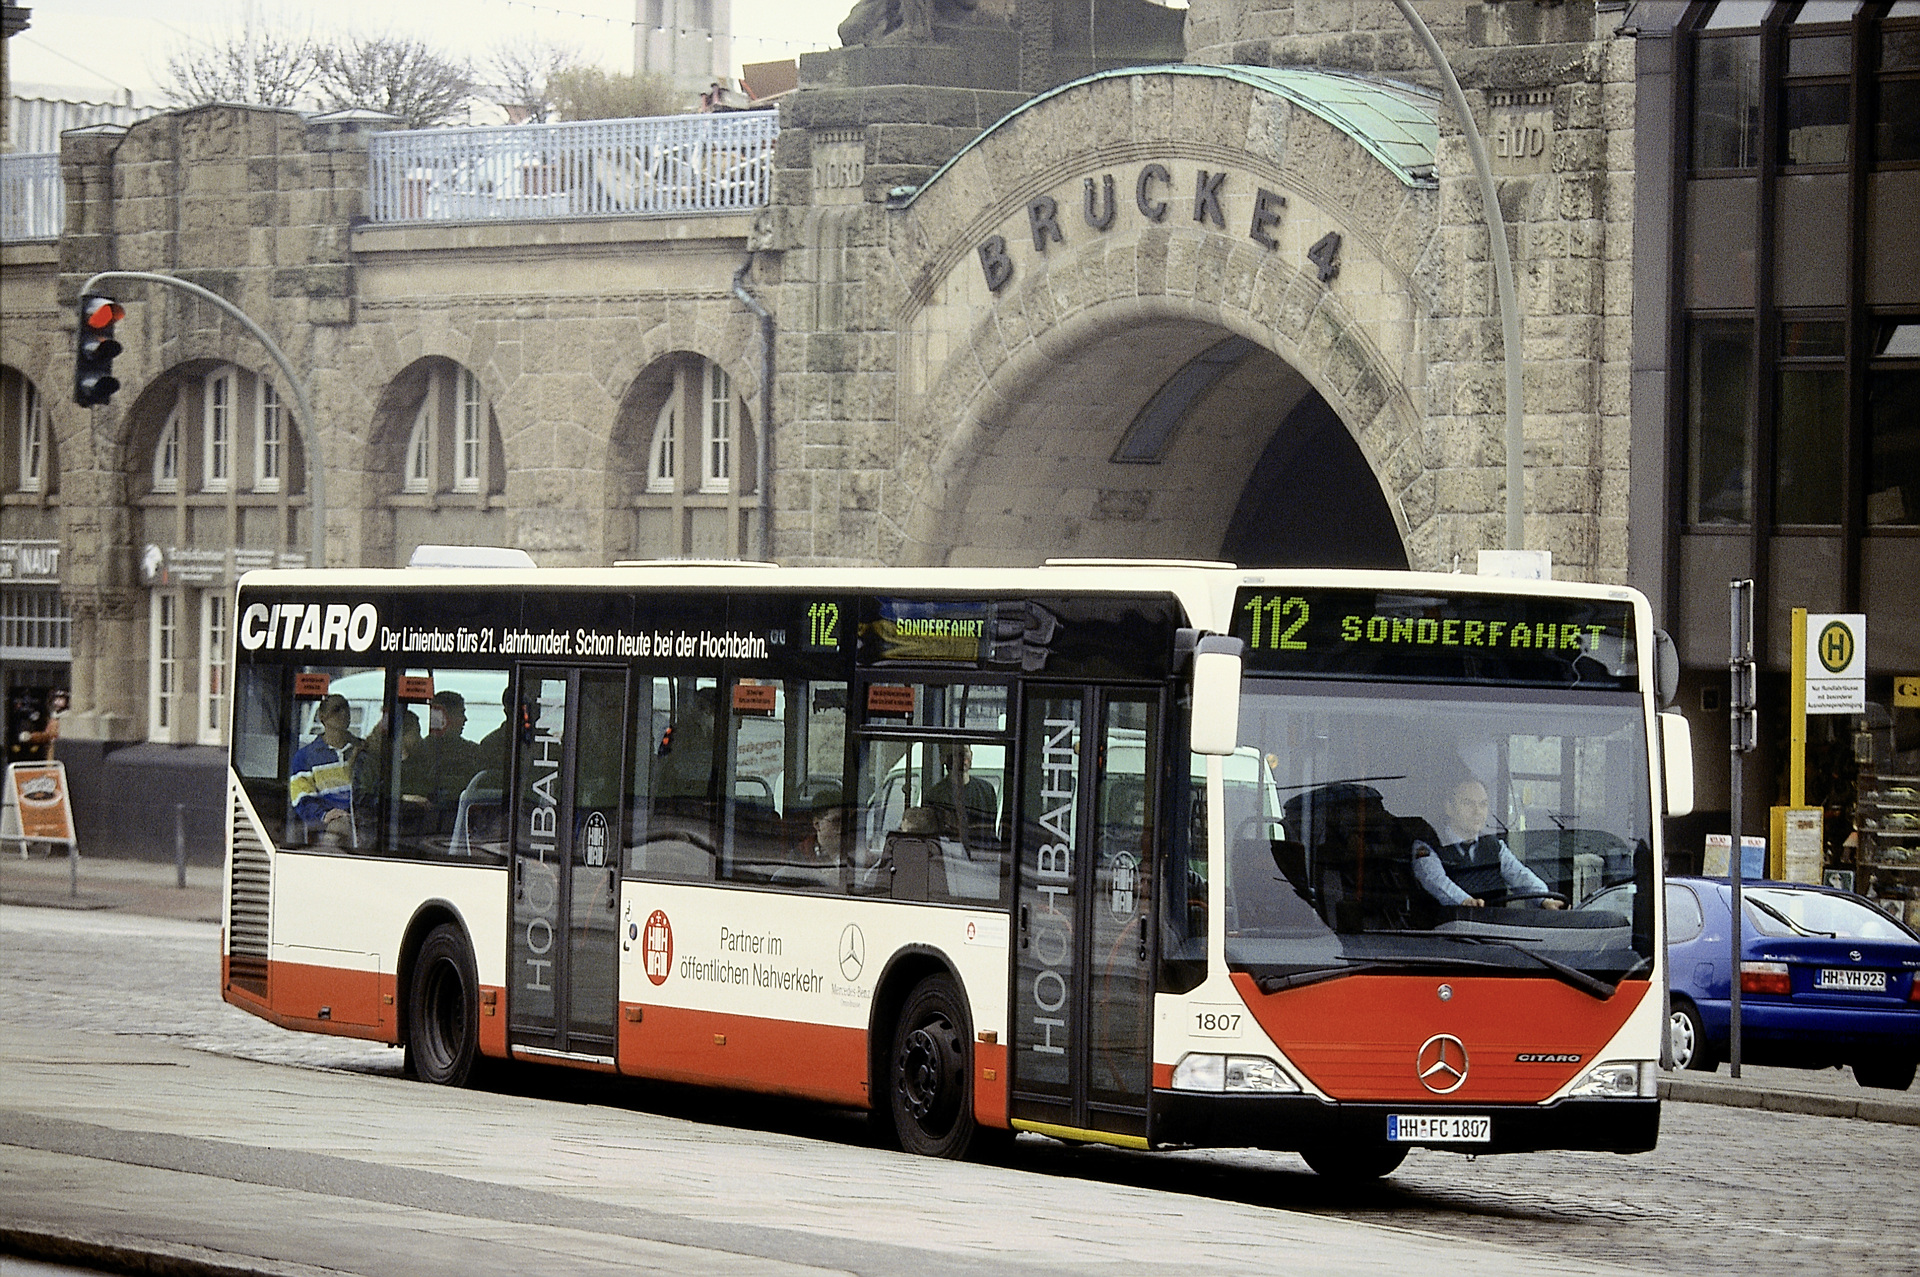 Daimler Busses celebrates 25th anniversary of best selling Mercedes-Benz Citaro city bus